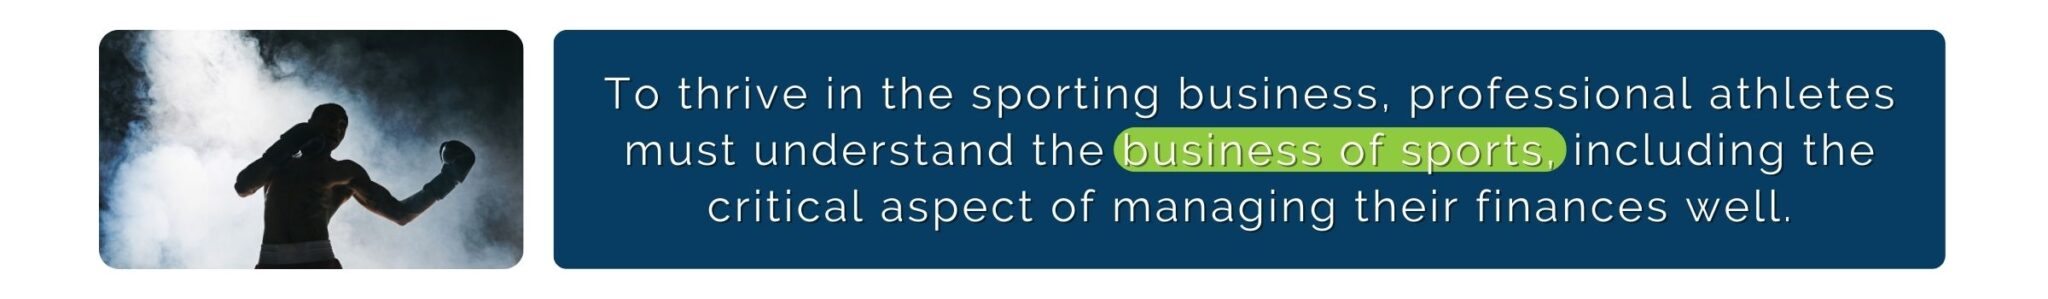 The-business-of-sports-1